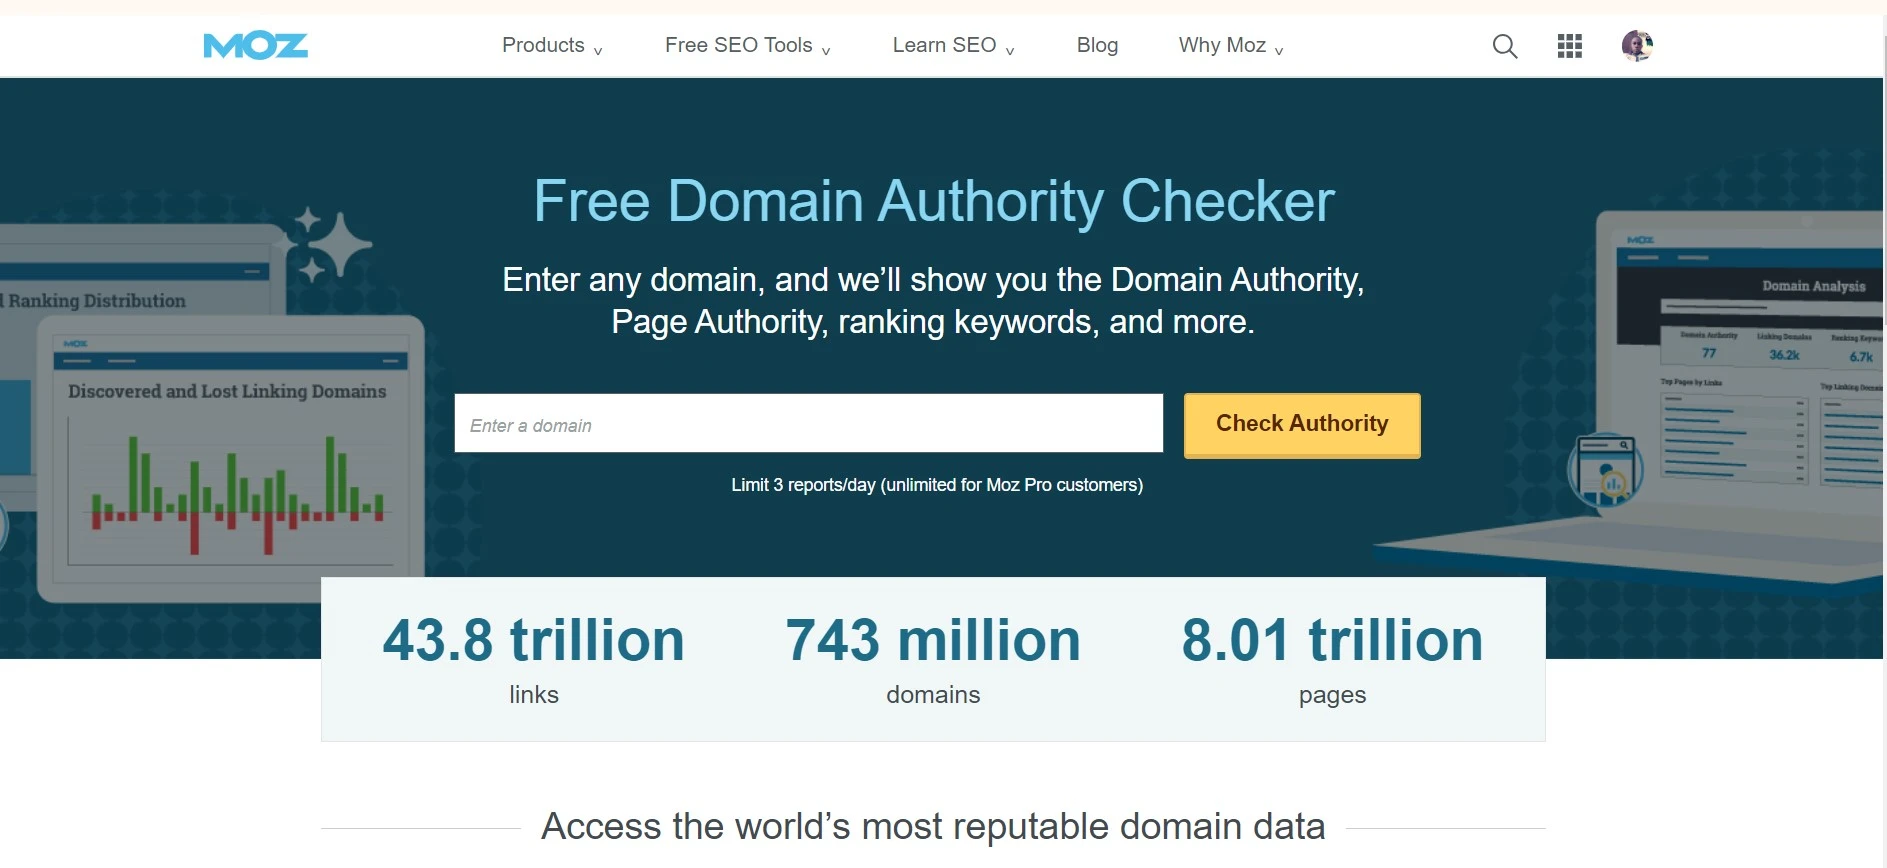 A screenshot of the MOZ website's Free Domain Authority Checker tool. The tool invites users to enter a domain to display its Domain Authority, Page Authority, and ranking keywords. The page also showcases statistics including 43.8 trillion links, 743 million domains, and 8.01 trillion pages. The design includes a graphic representation of a laptop showing a sample domain analysis and a mobile device with MOZ branding. The color scheme is predominantly blue and white with green accents.